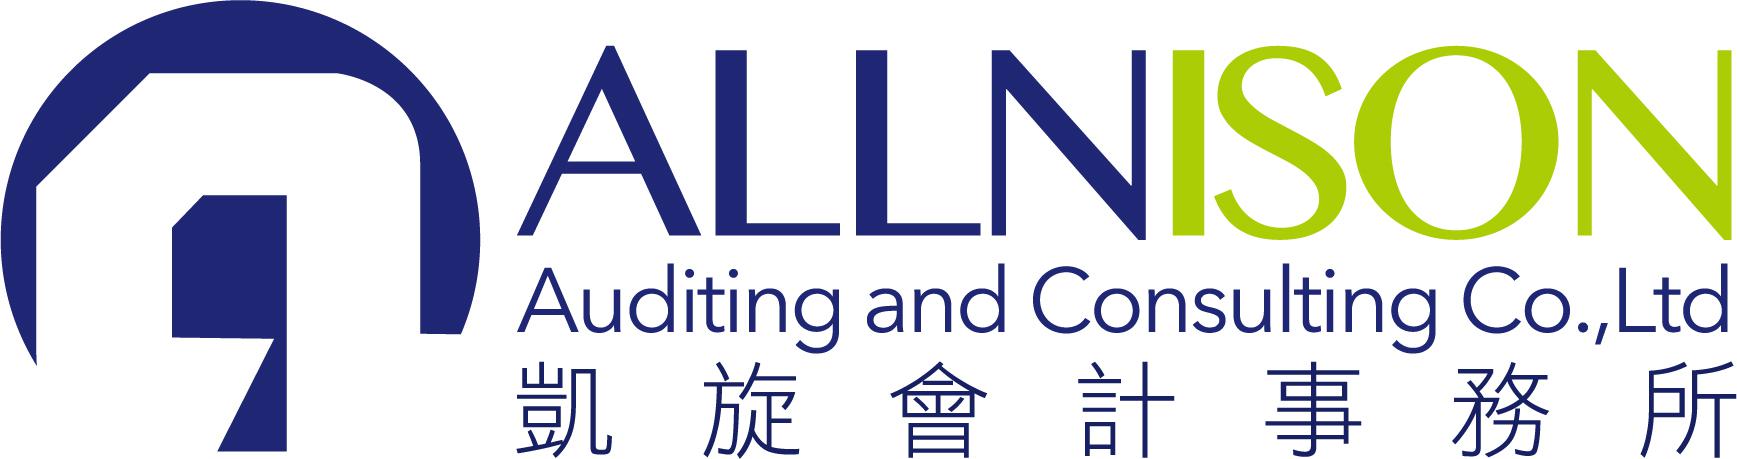 ALLNISON Auditing and Consulting Co., Ltd Logo